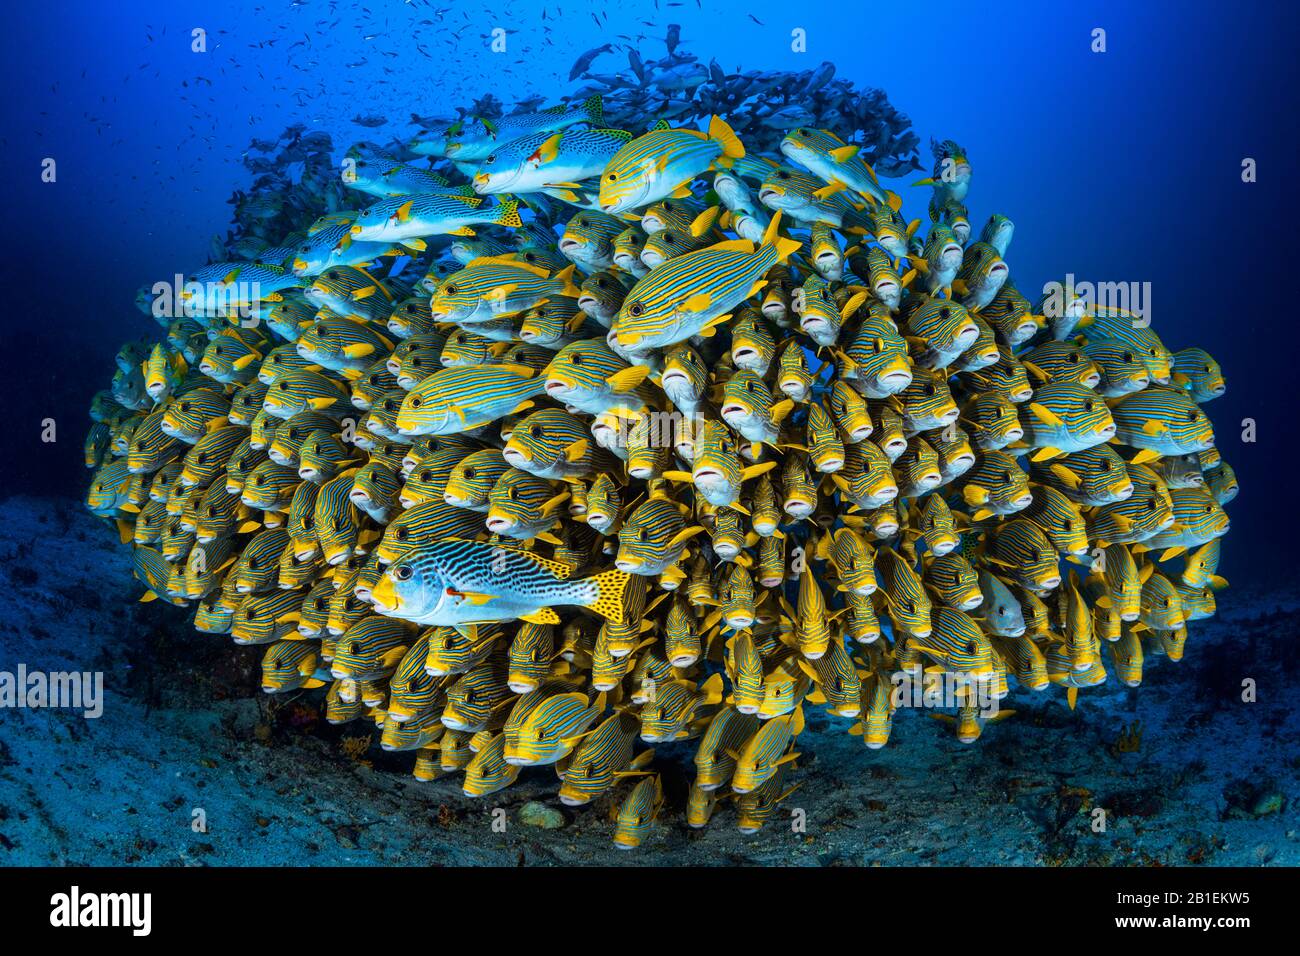 School of sweetlips in very very tight formation. The purpose of this training is to intimidate a potential predator who wants to attack these fish. W Stock Photo